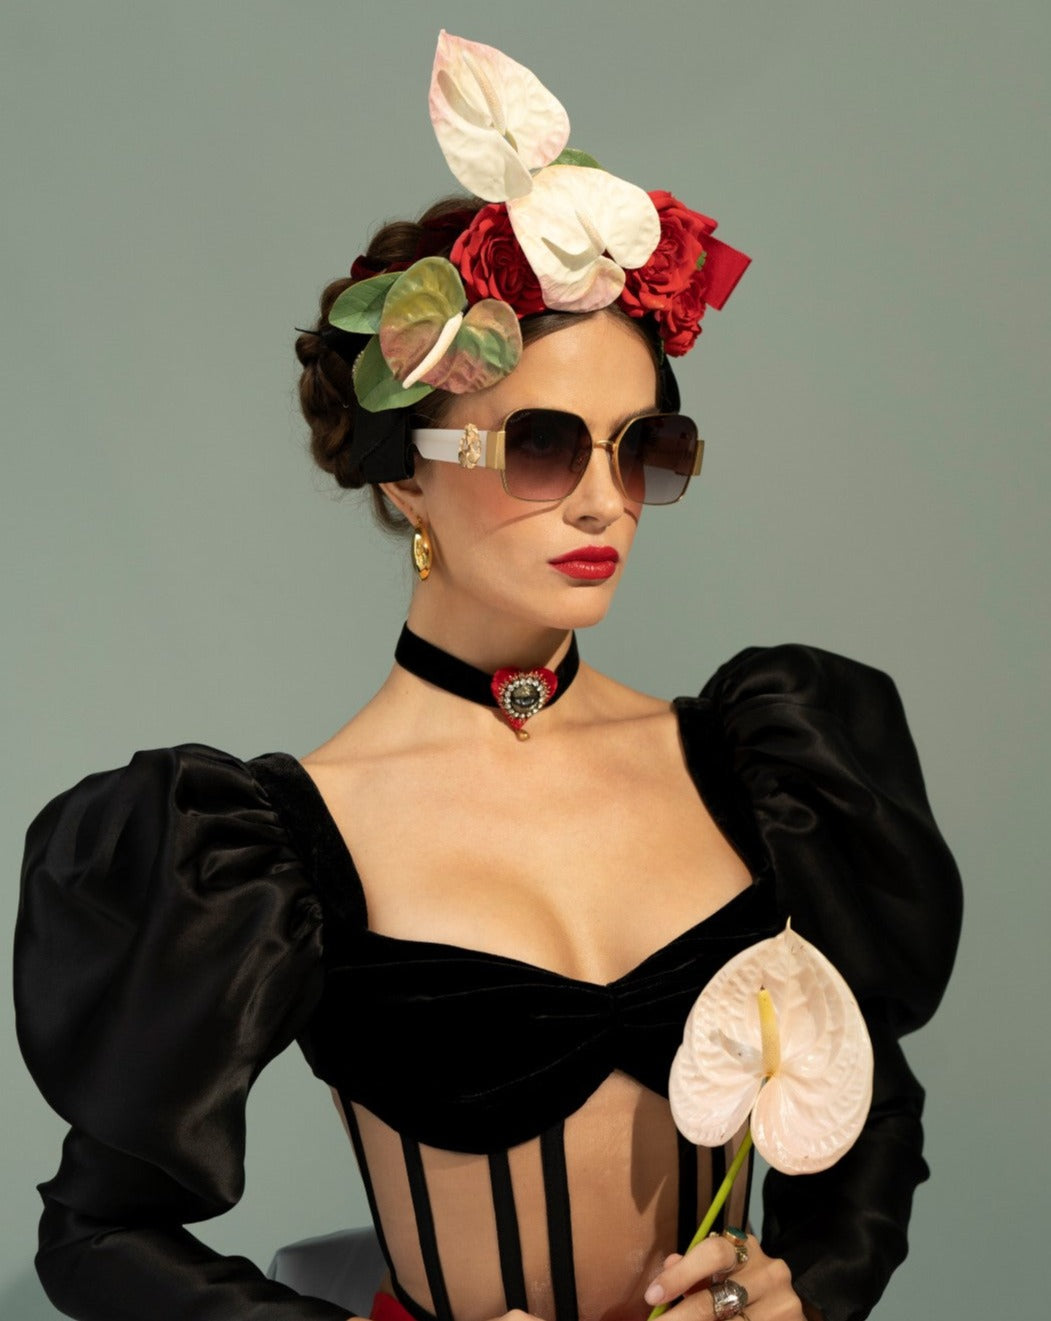 A woman in stylish, modern attire poses against a plain background. She wears oversized, ultra-lightweight For Art&#39;s Sake® Frida Mask with 100% UVA &amp; UVB protection, a black dress with puffed sleeves, a floral headpiece, and a choker necklace. Holding light pink flowers, her look is sophisticated and fashion-forward.